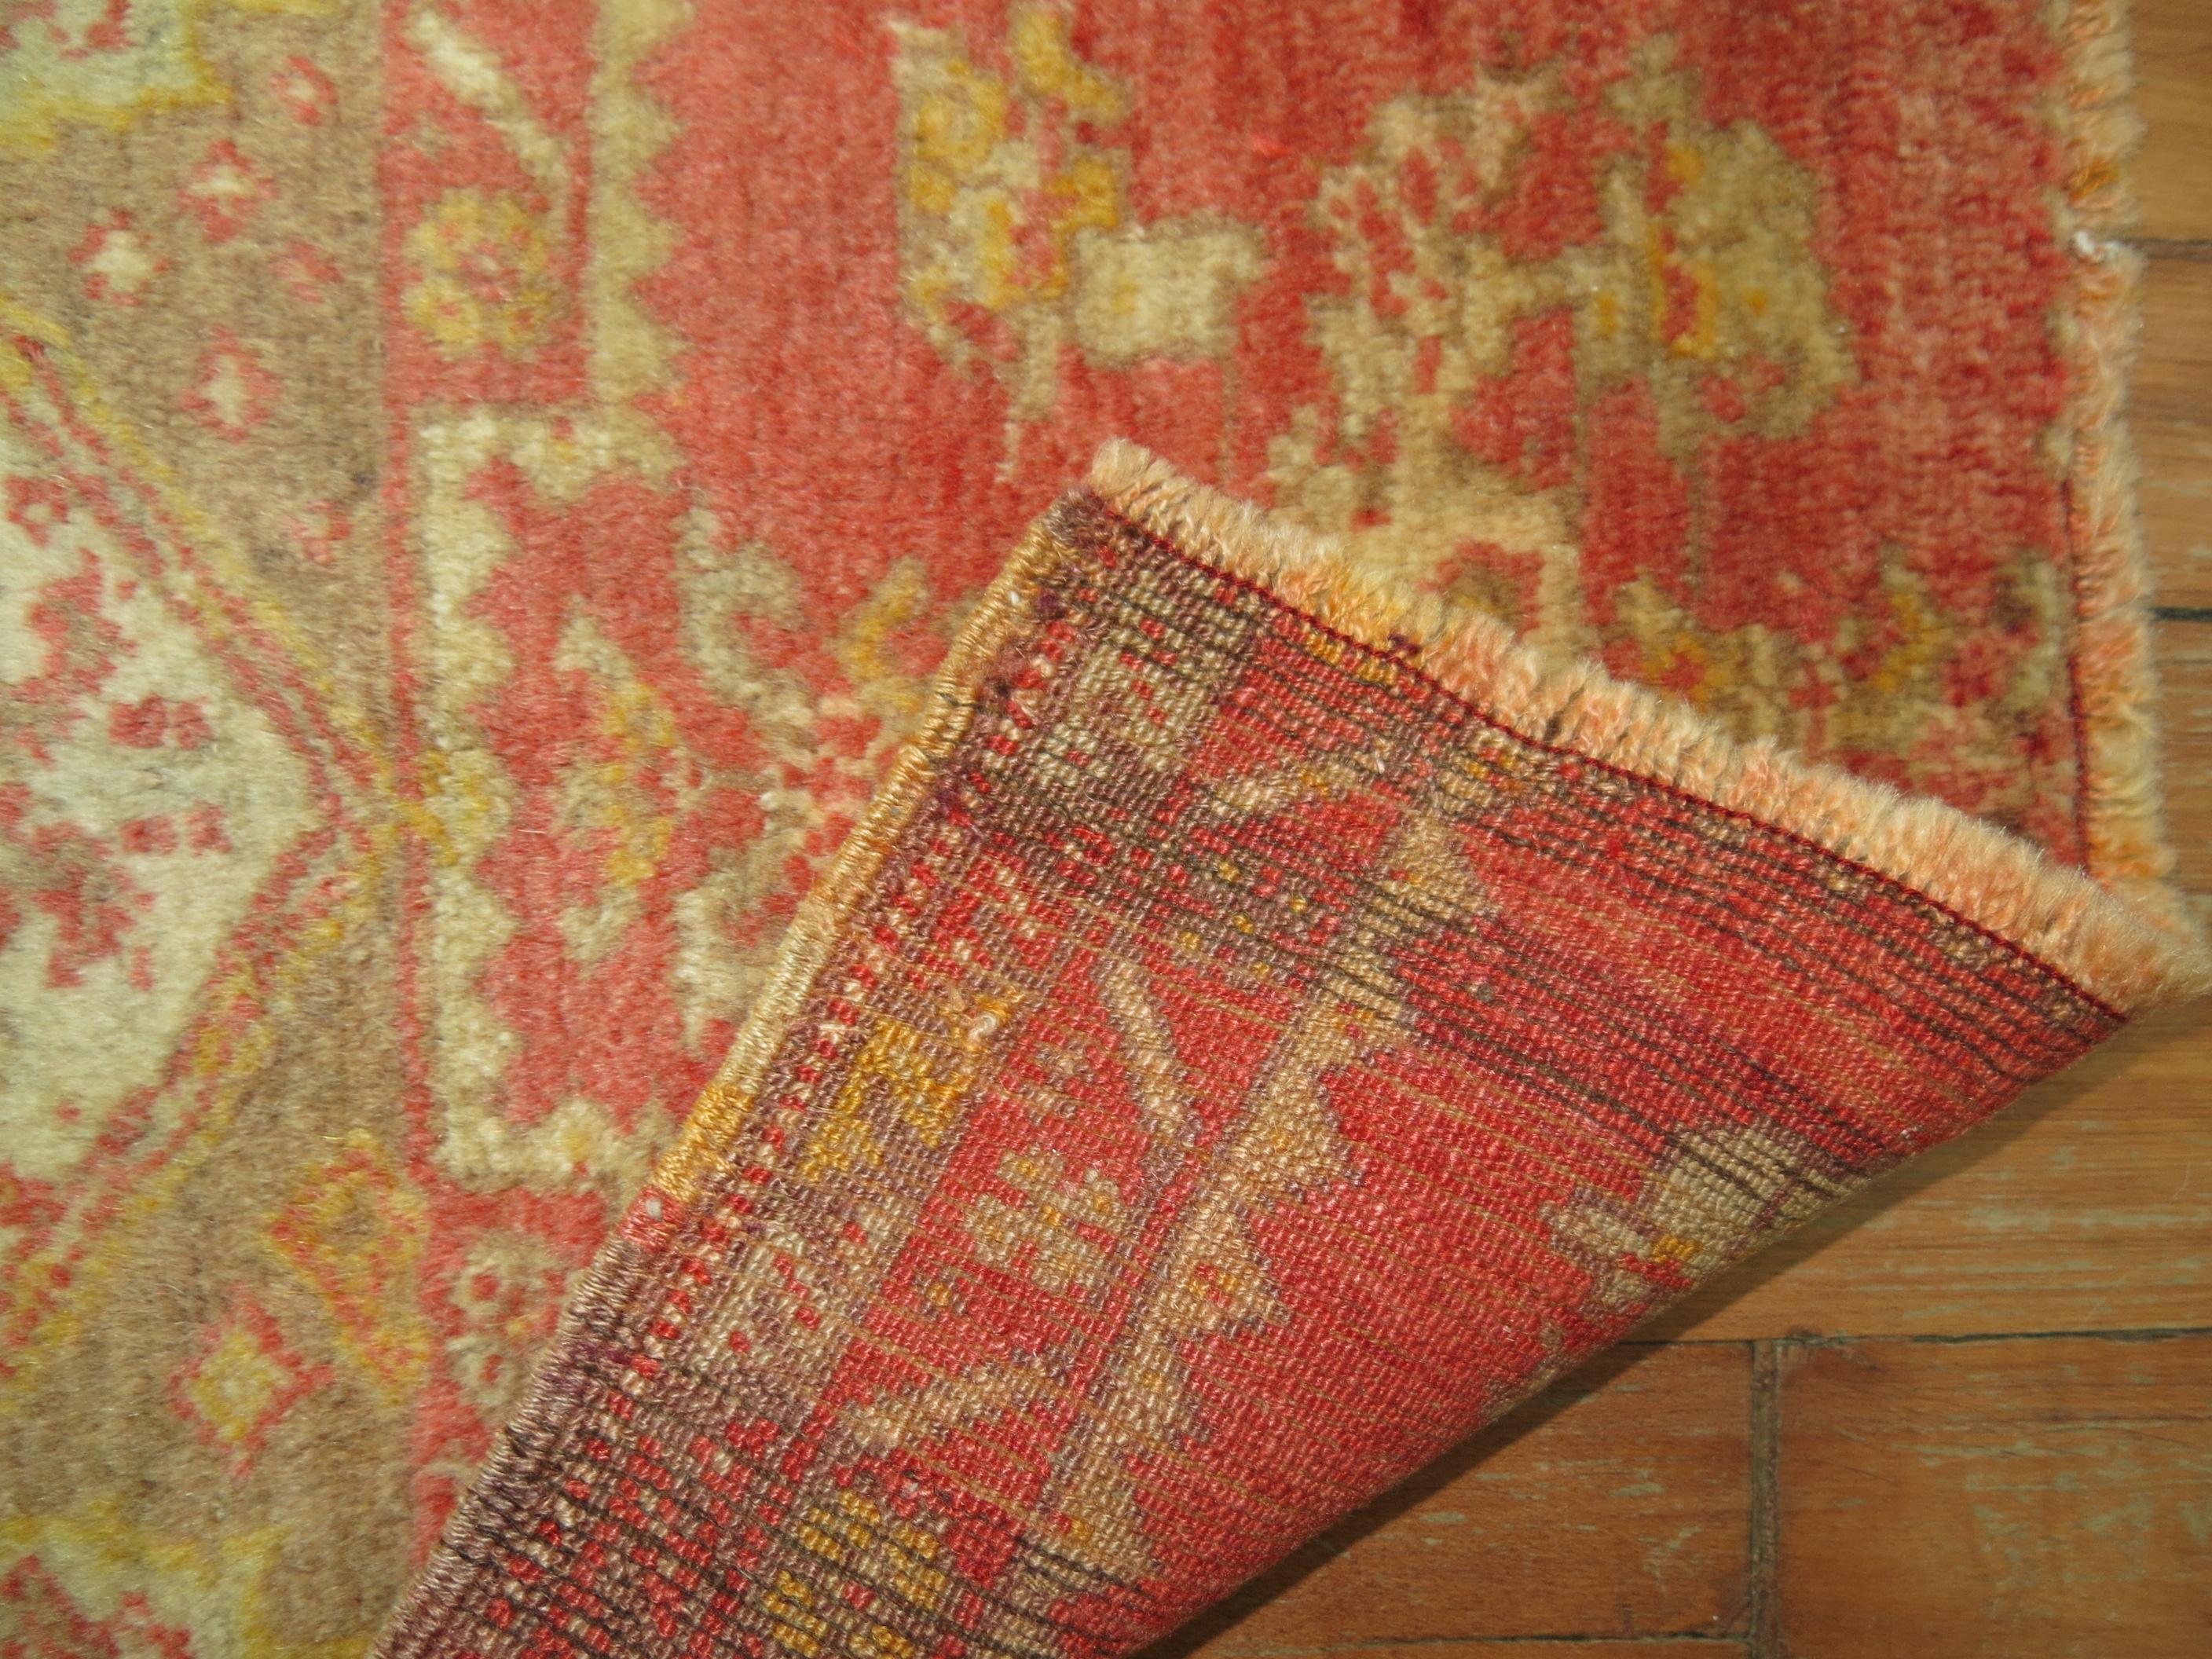 A fine Turkish rug mat from the early part of the 20th century.

18'' x 3'2''